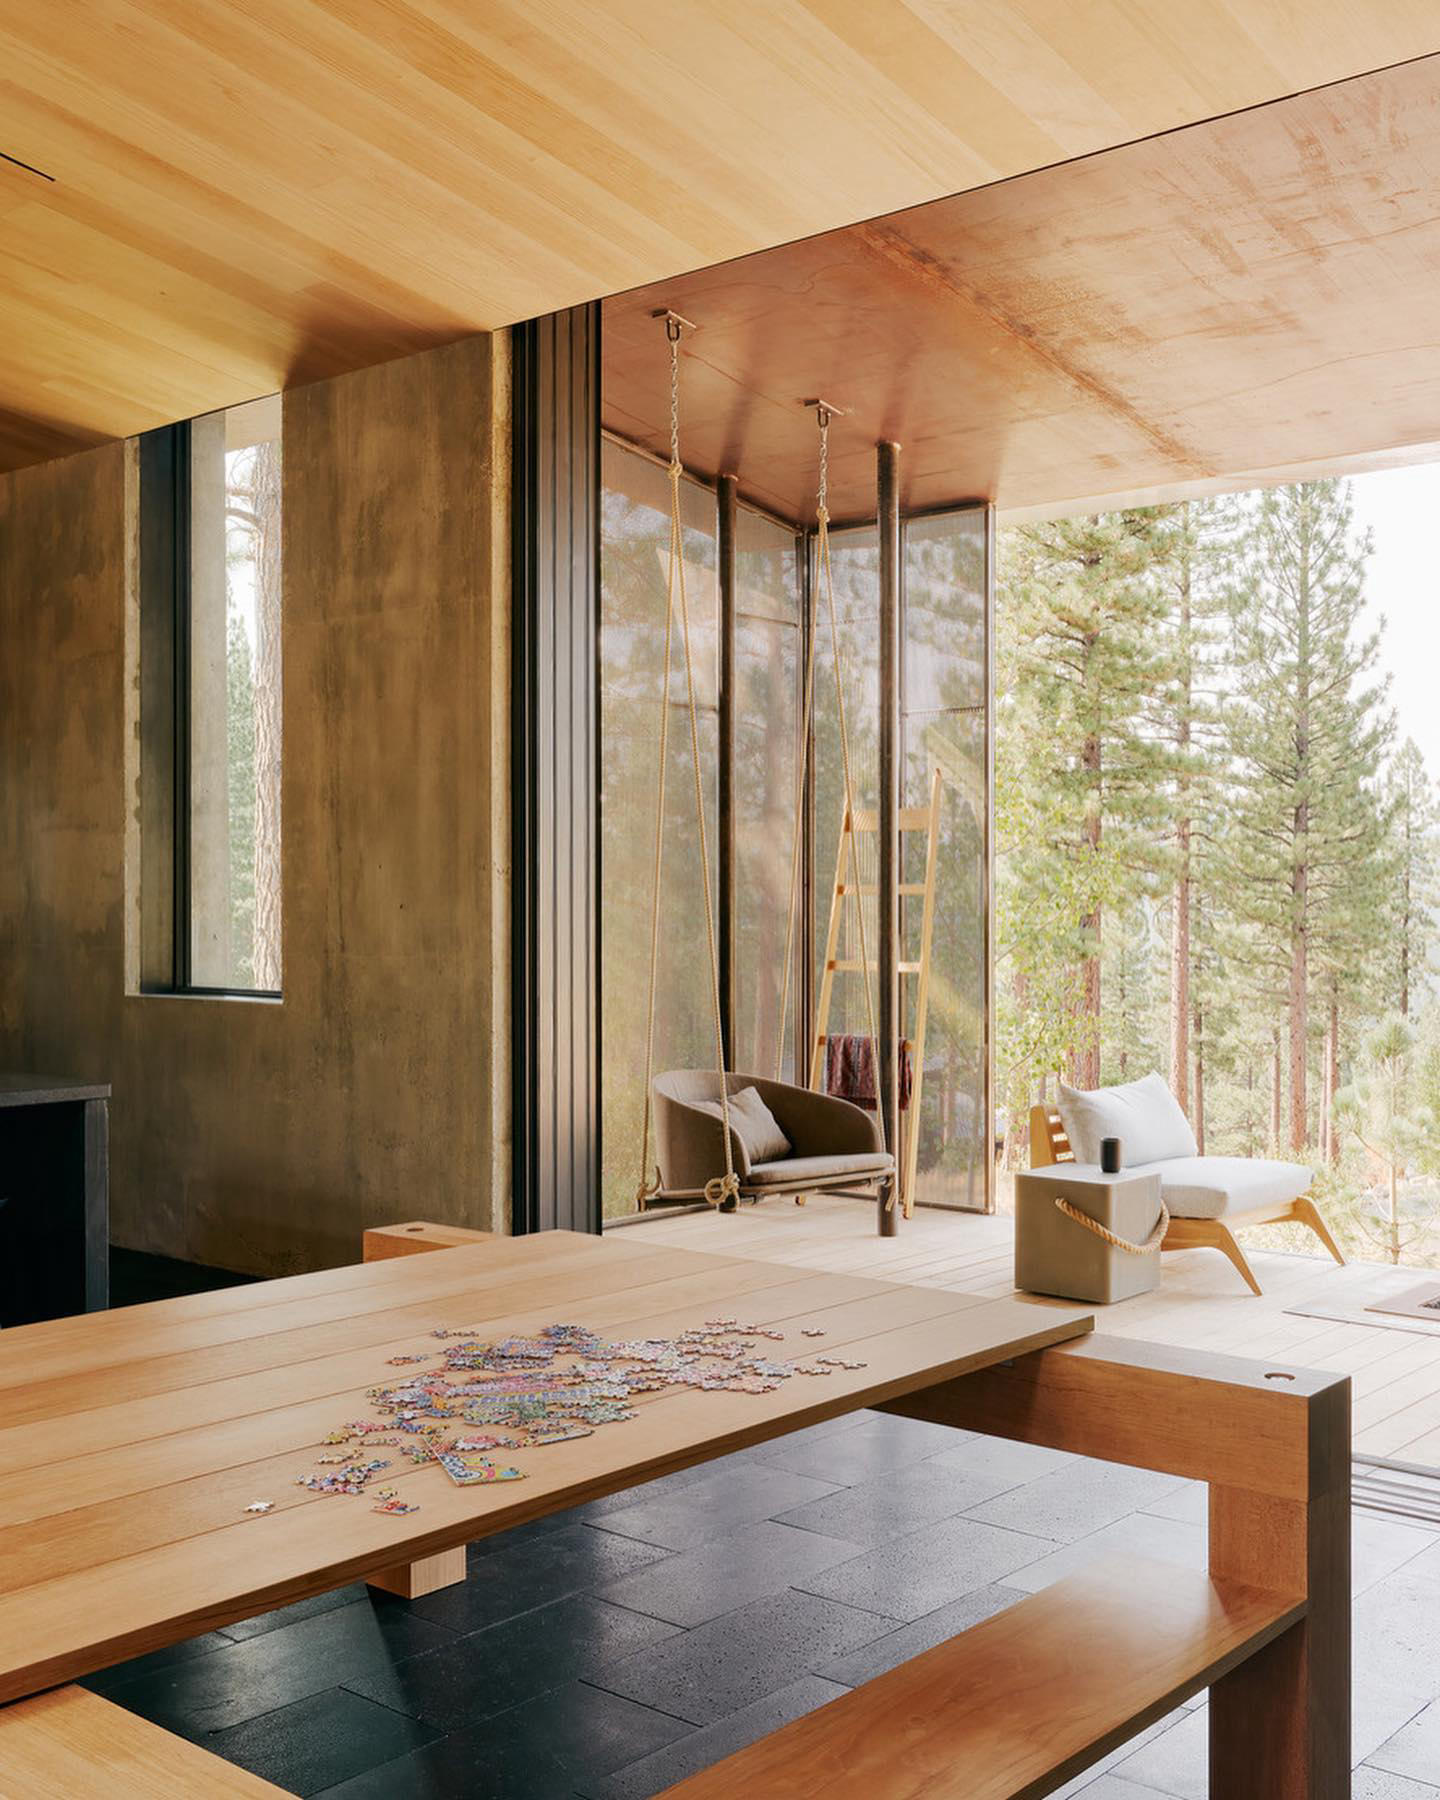 image  1 Campout House designed by Faulkner Architects #faulknerarchitects, located in #Tahoe, #California an